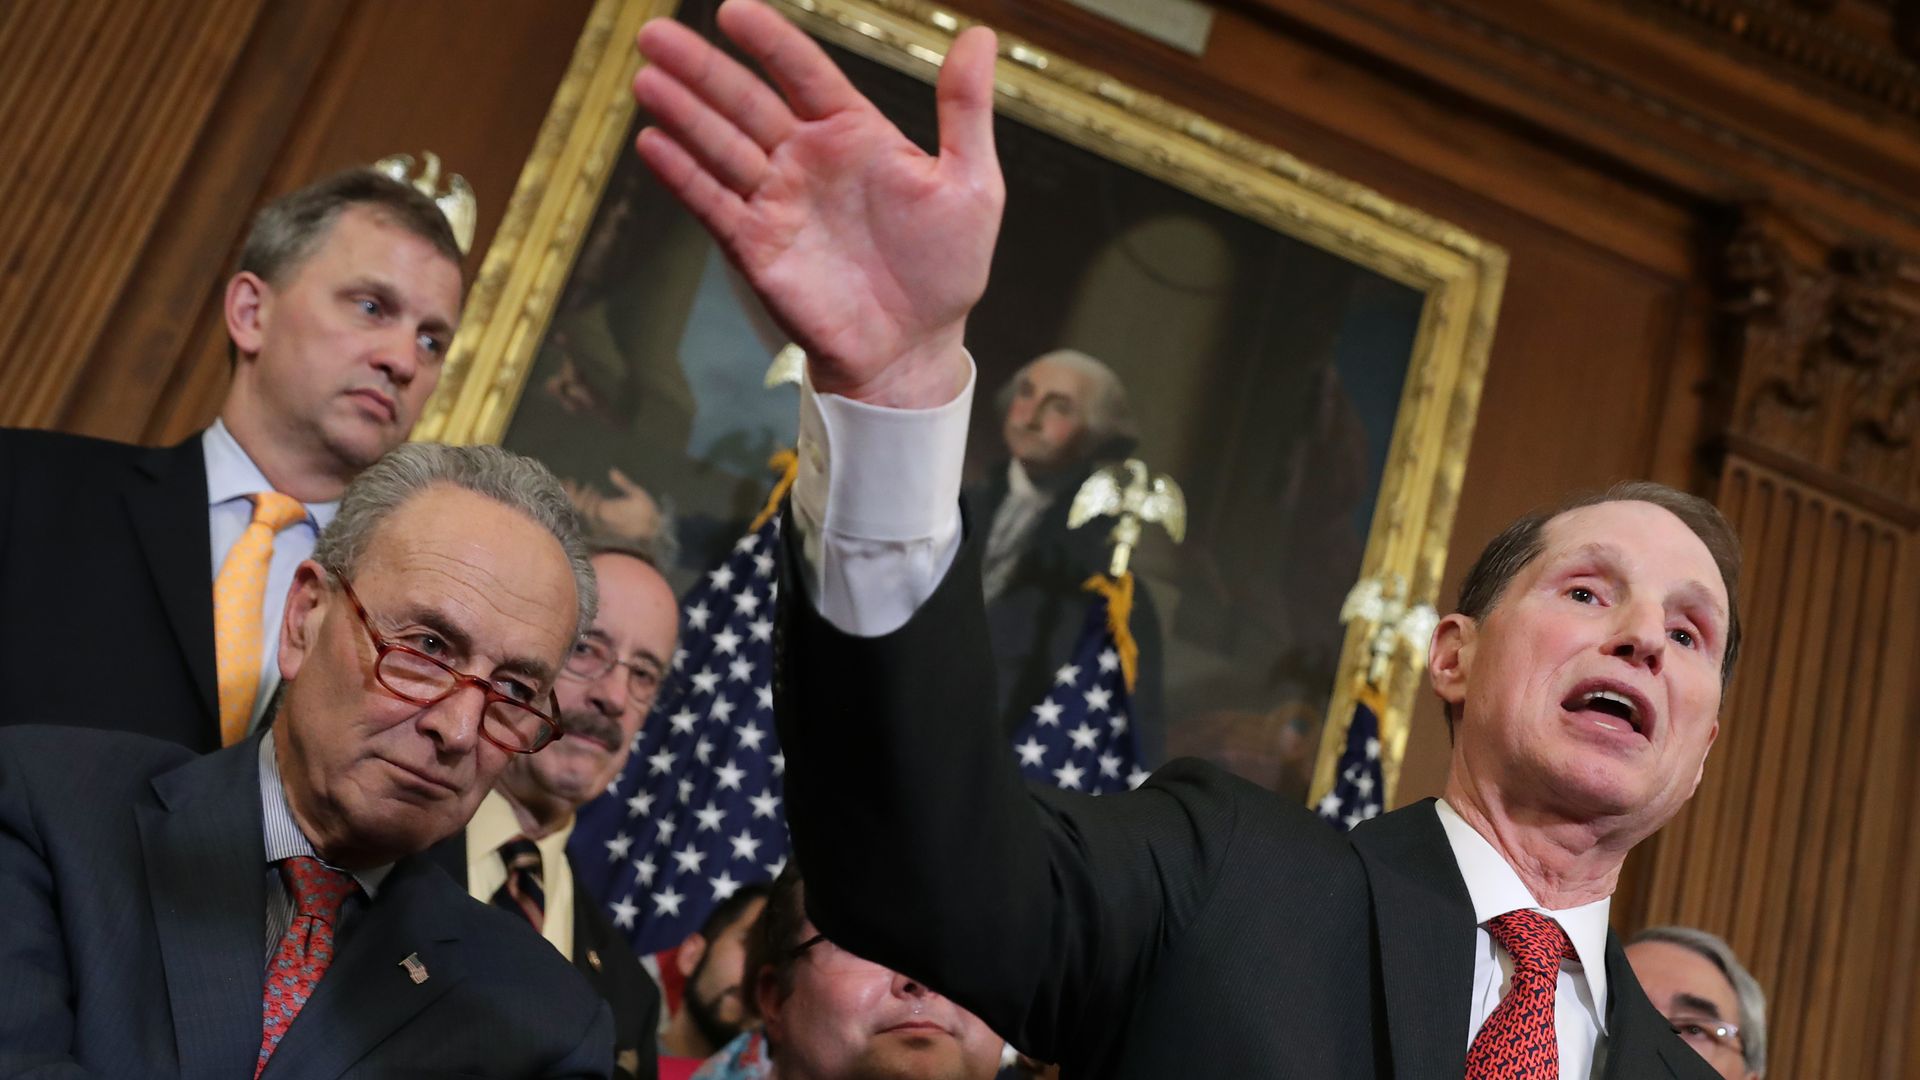 Chuck Schumer watches as Ron Wyden raises his hand while giving a speech. 